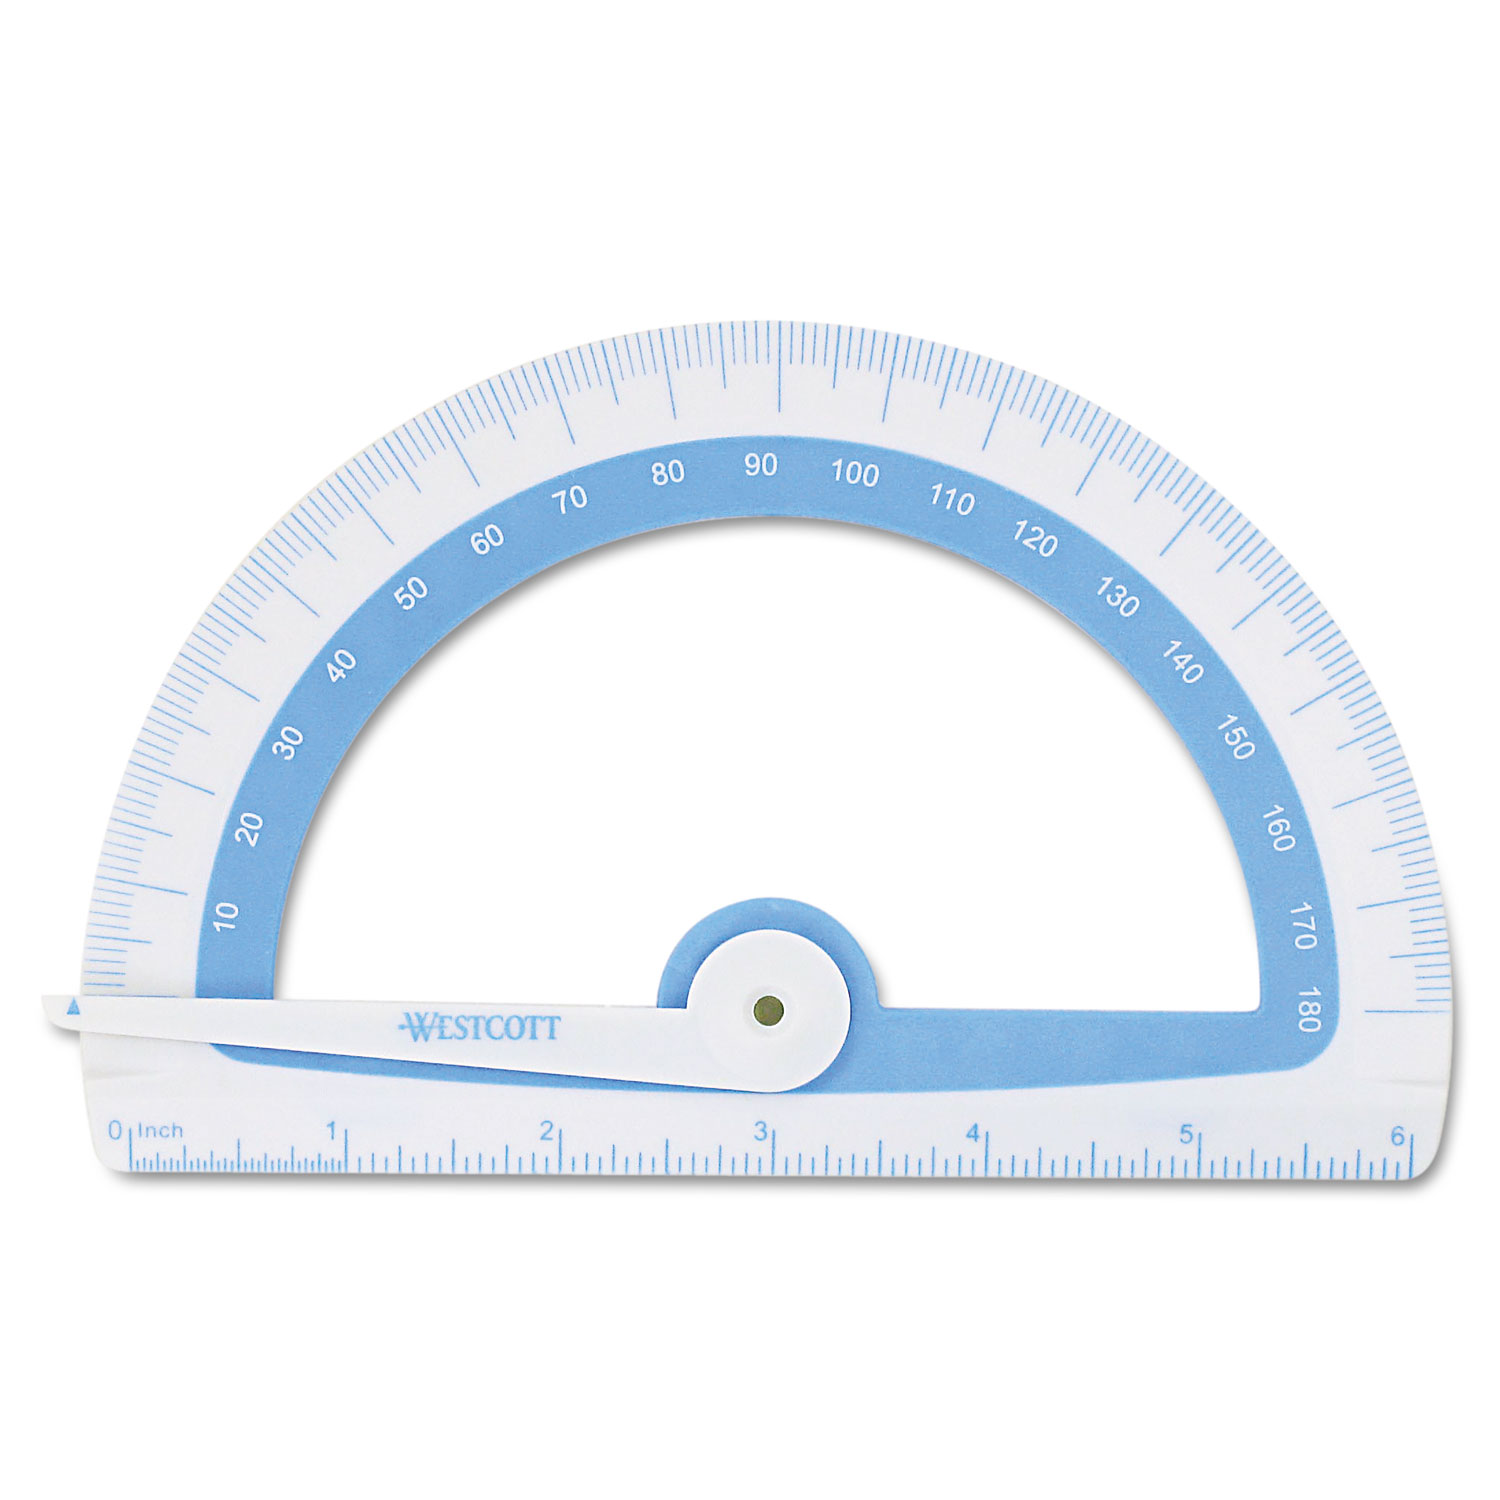  Westcott 14376 Soft Touch School Protractor With Microban Protection, Assorted Colors (ACM14376) 